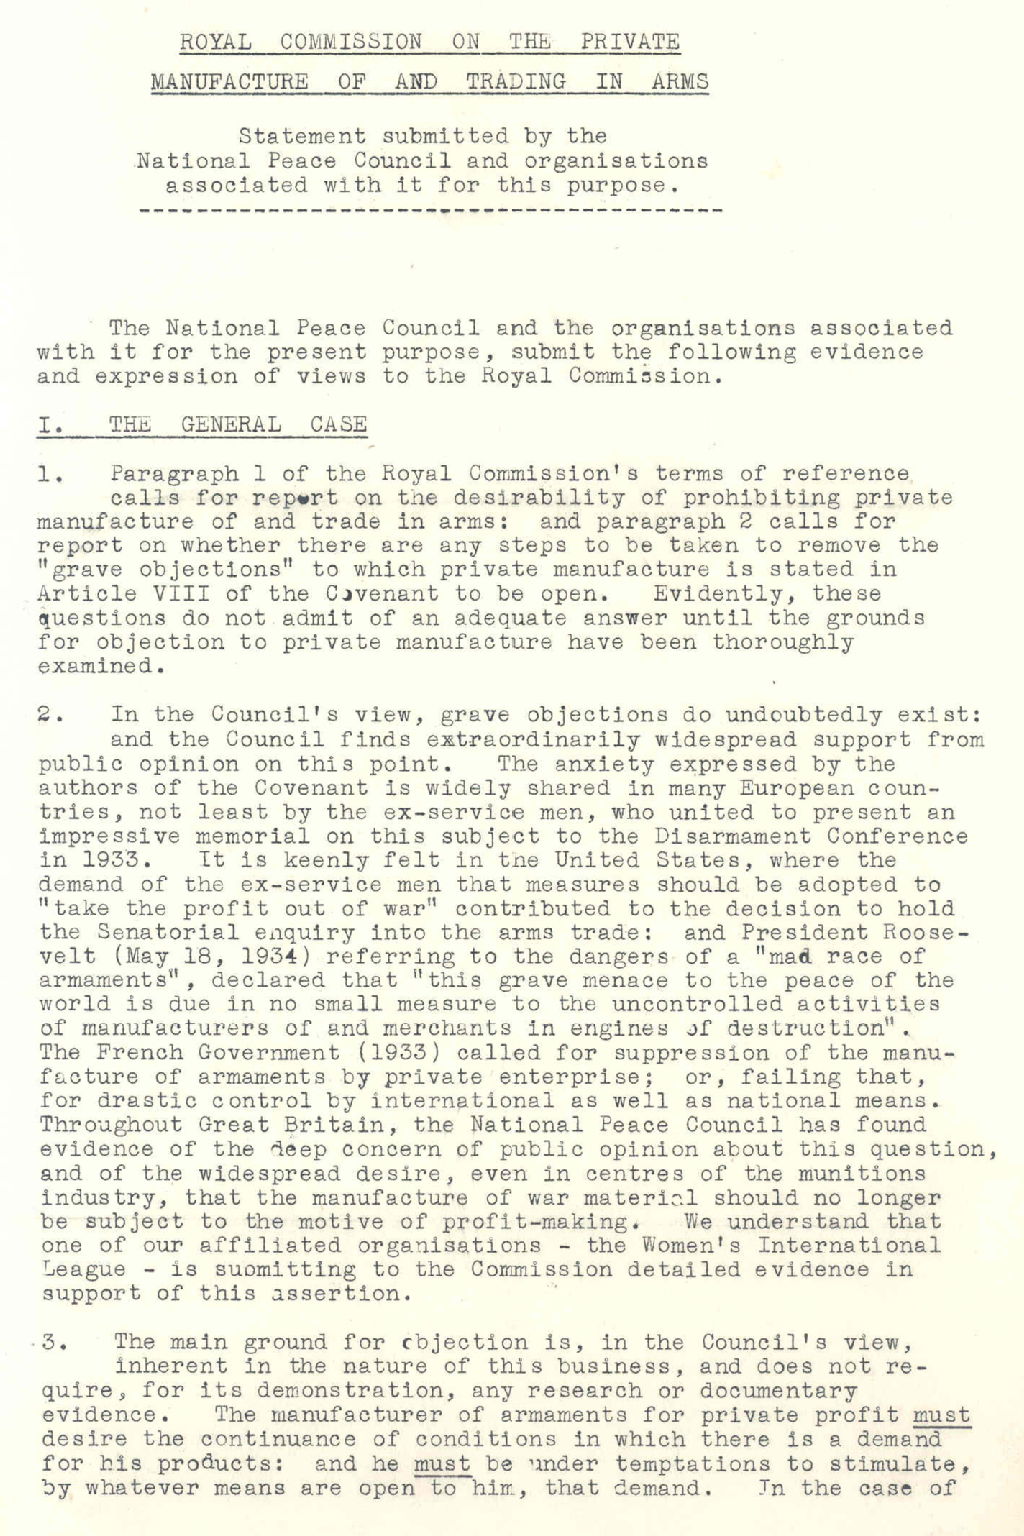 Statement to the Royal Commission of Enquiry into the Private Manufacture of and Trading in Arms, May 1935